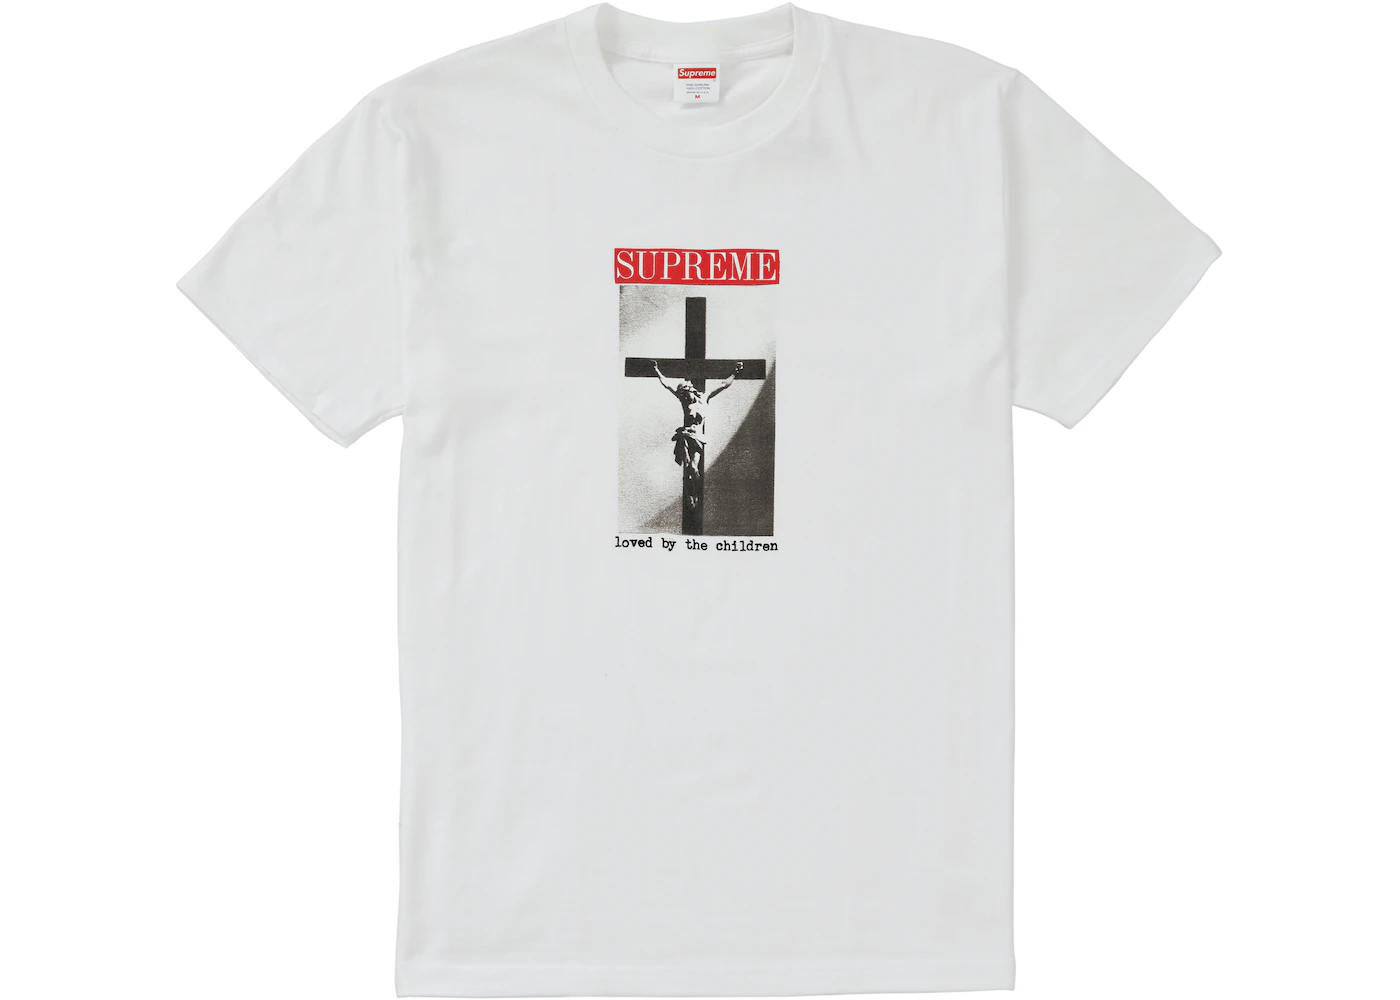 Supreme Loved By The Children Tee White Men's - SS20 - US